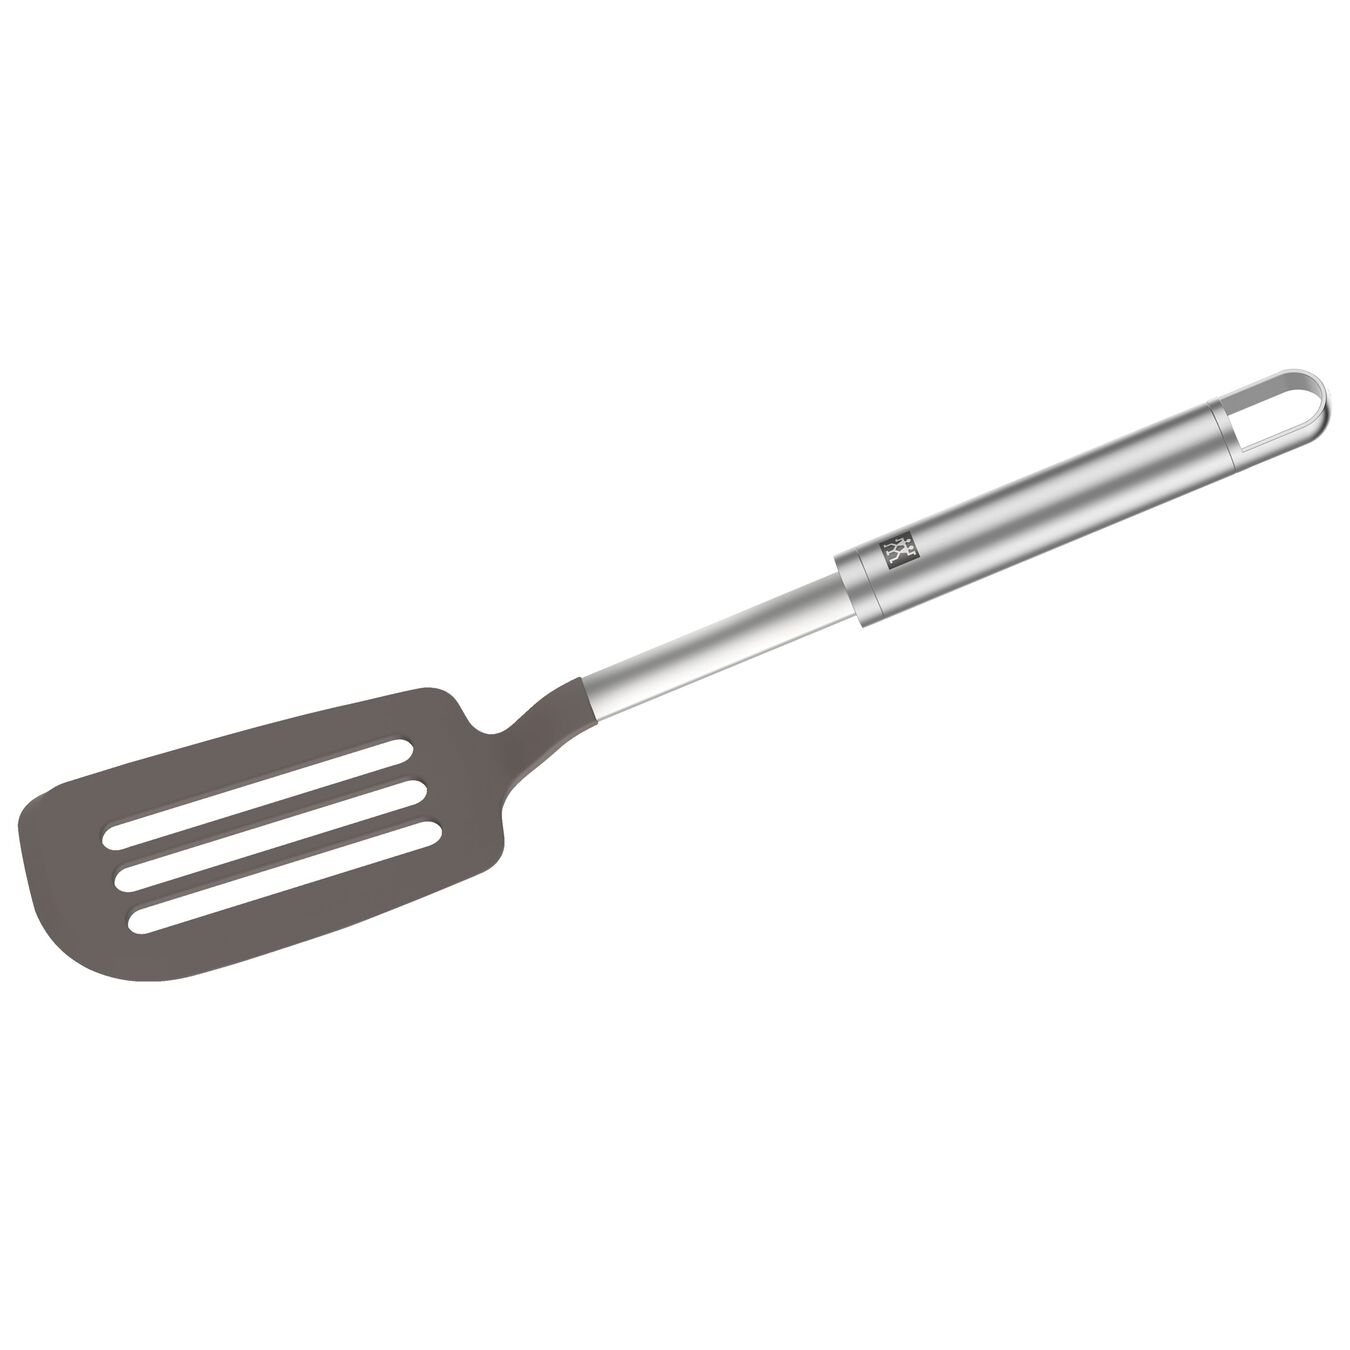 Norpro Stainless Steel Short Slotted Turner - The Peppermill